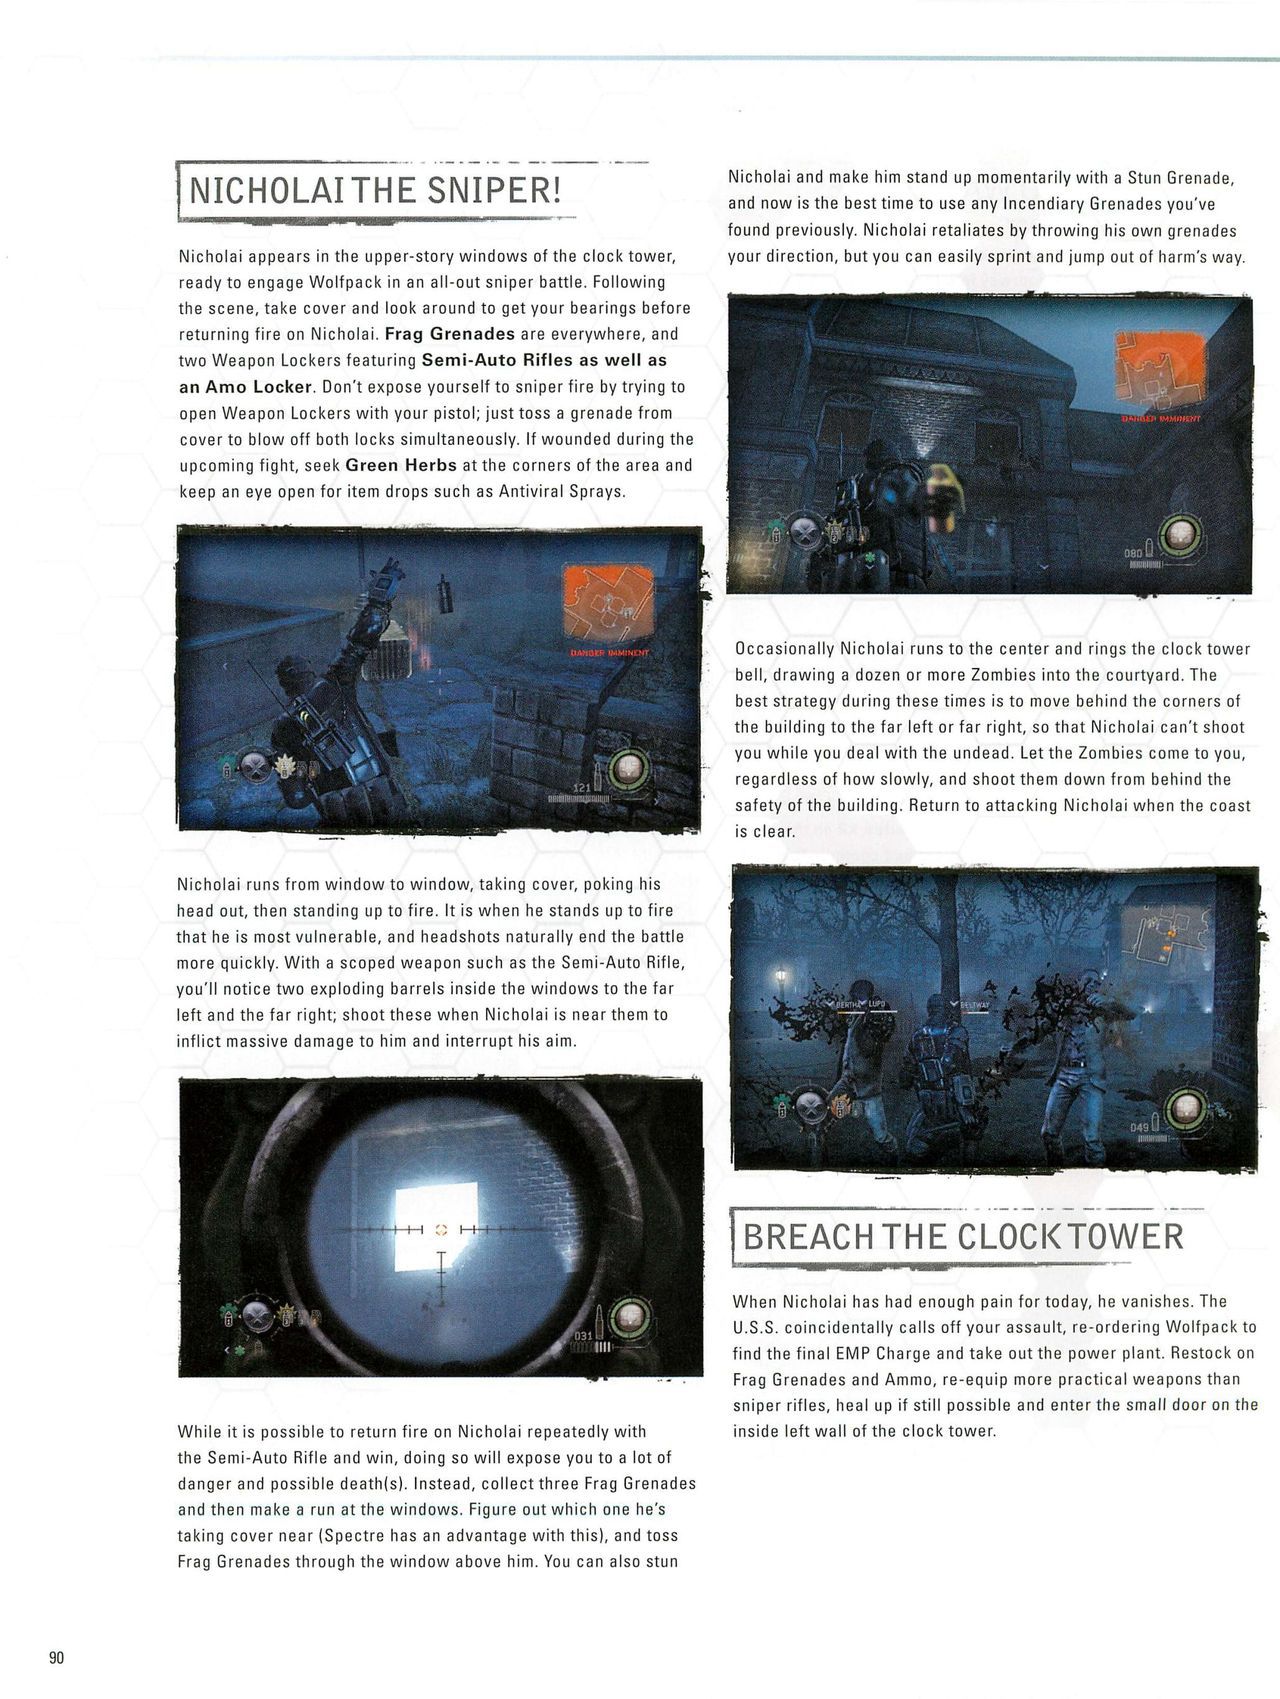 Resident Evil: Operation Raccoon City Official Strategy Guide (watermarked) 92